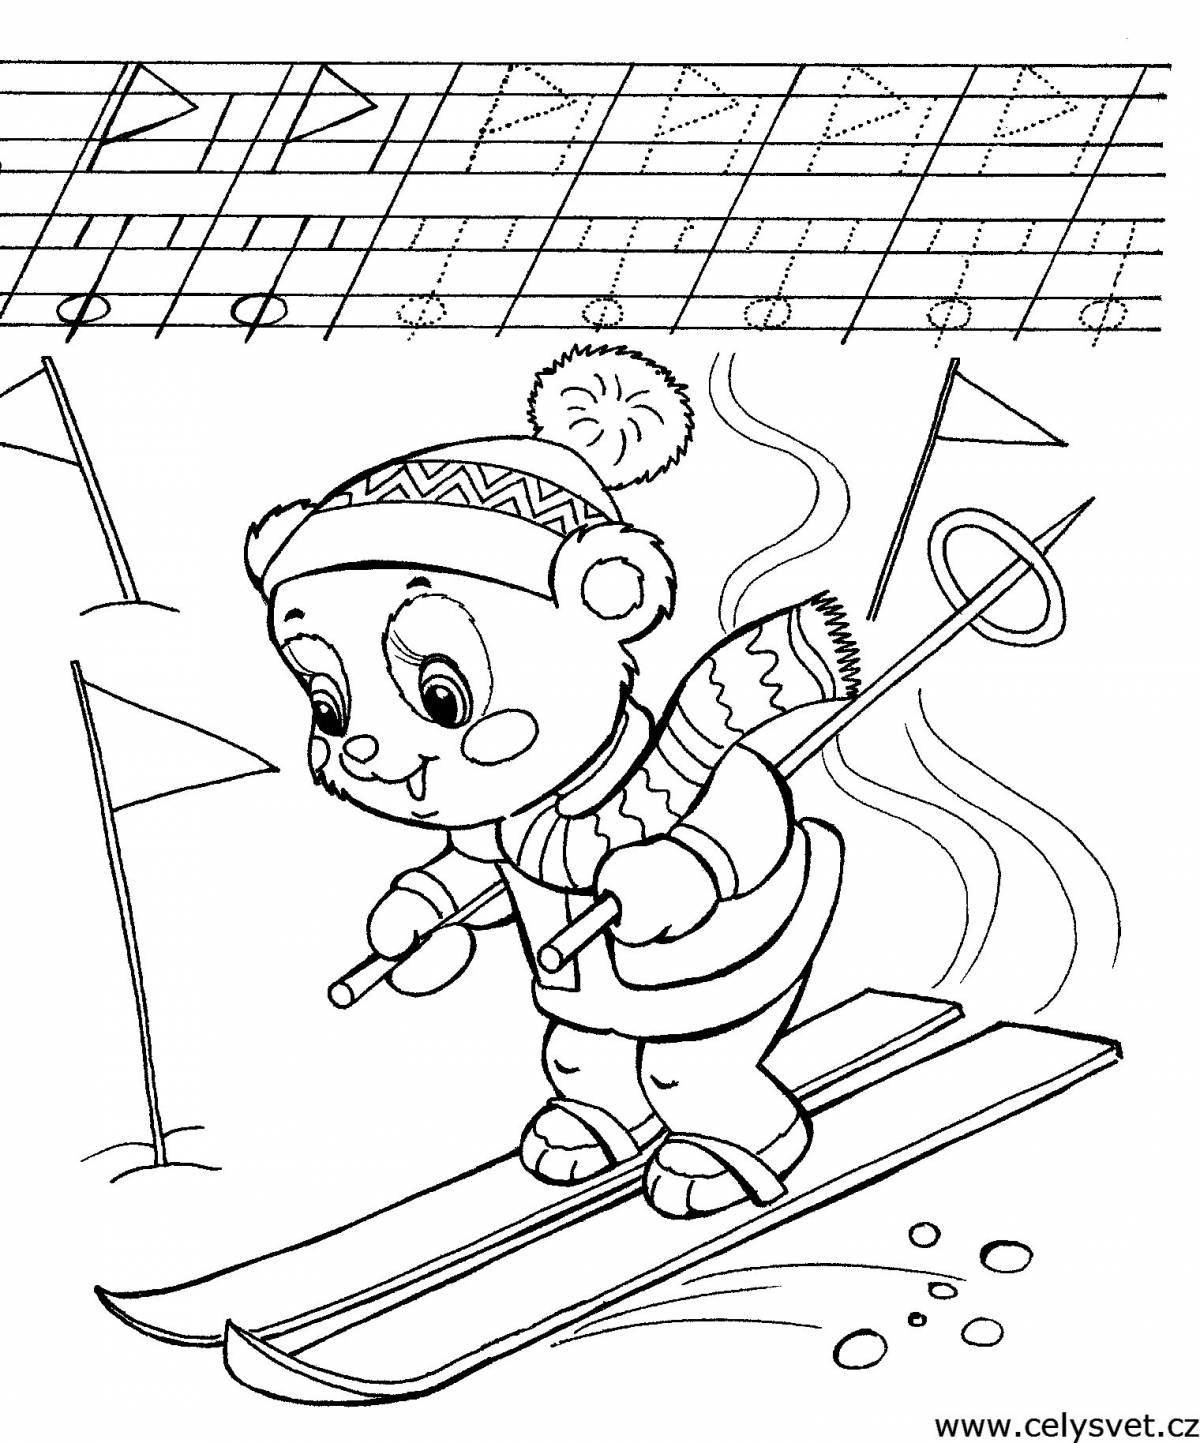 Amazing winter sports coloring page for 6-7 year olds